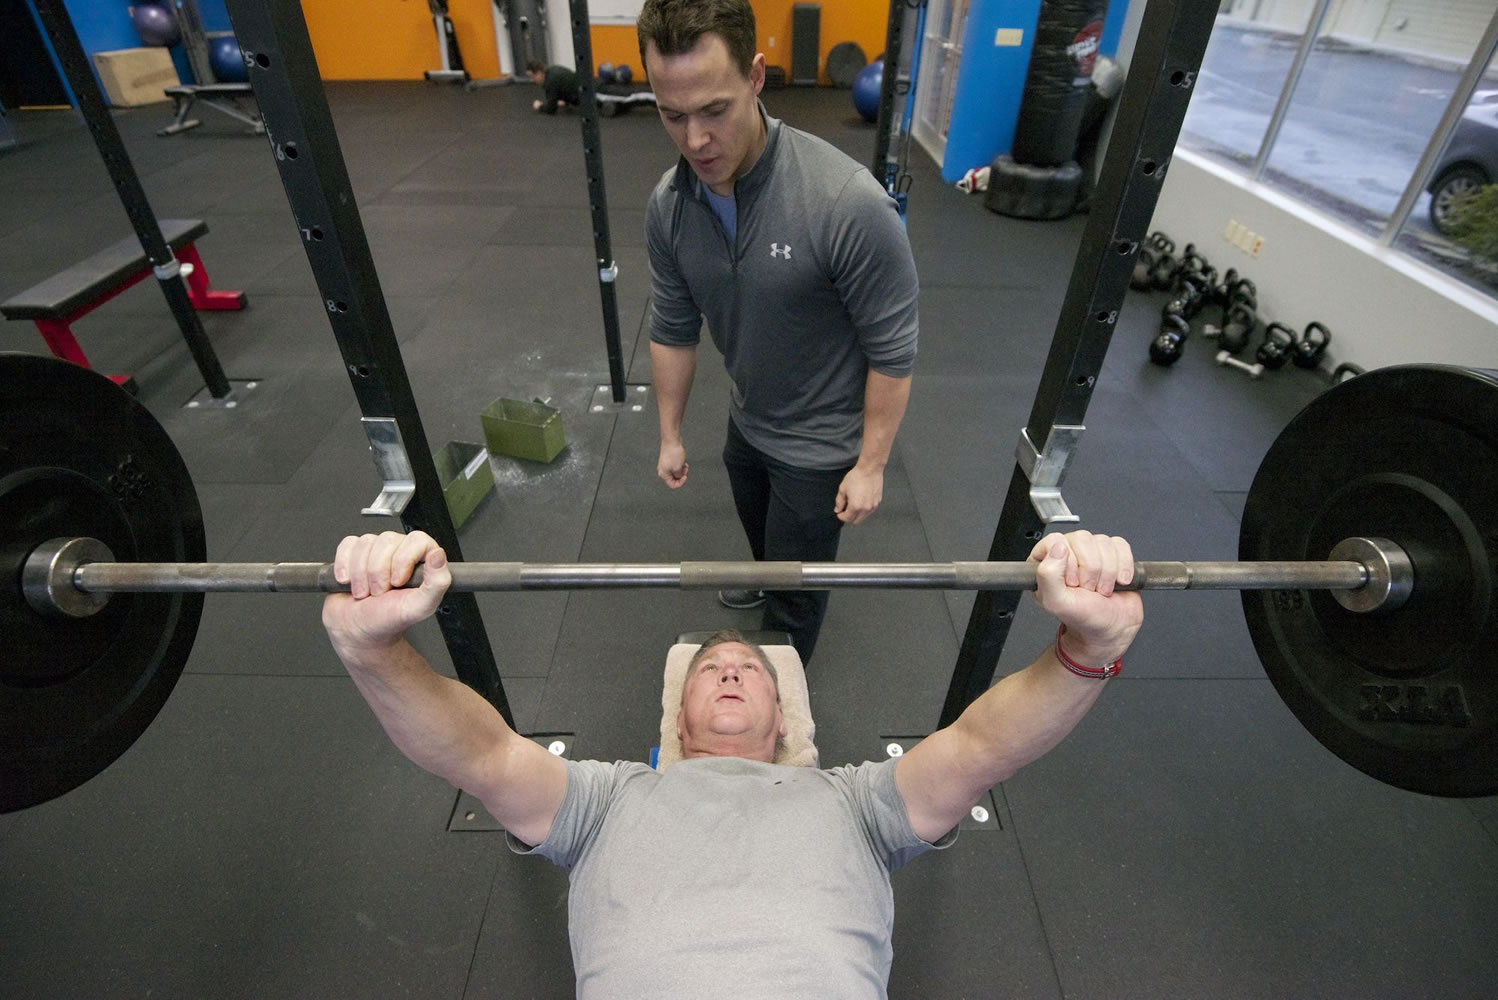 David Williams, 61, of Hockinson lifts weights under the guidance of Brian Stecker, a personal trainer who specializes in fitness for baby boomers, at his east Vancouver training studio.